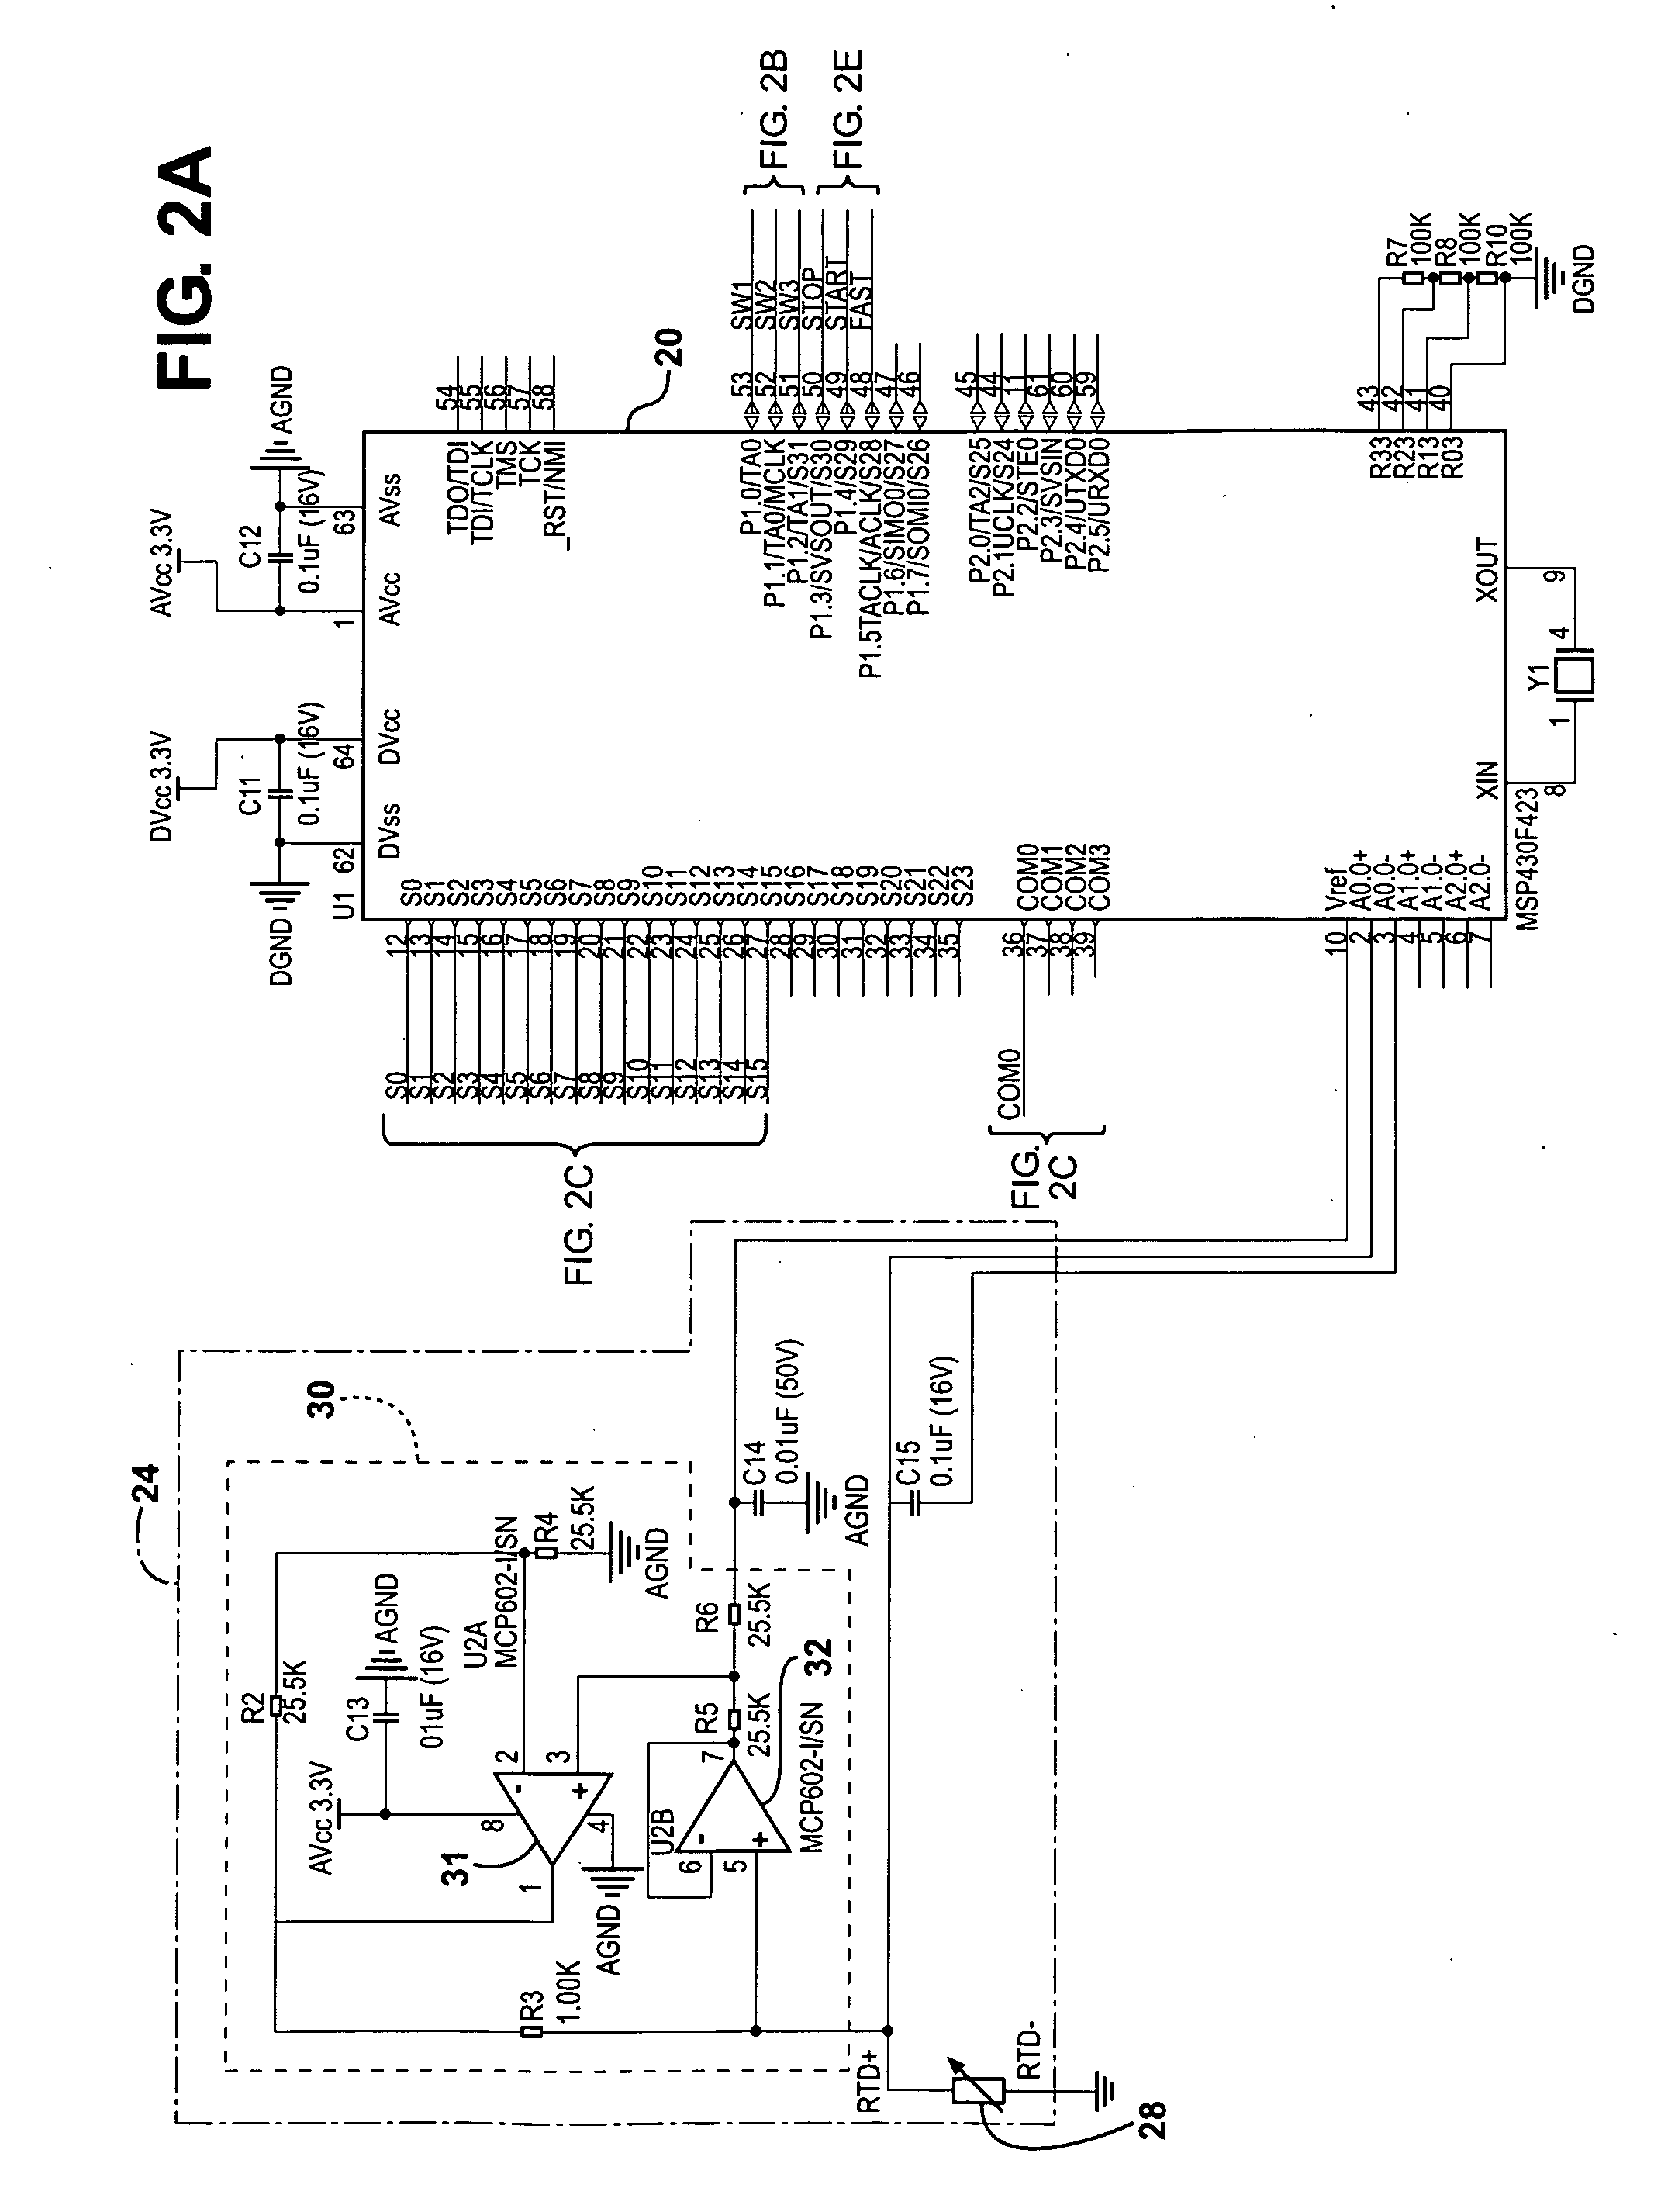 Control system and method for controlling an air handling fan for a vent hood